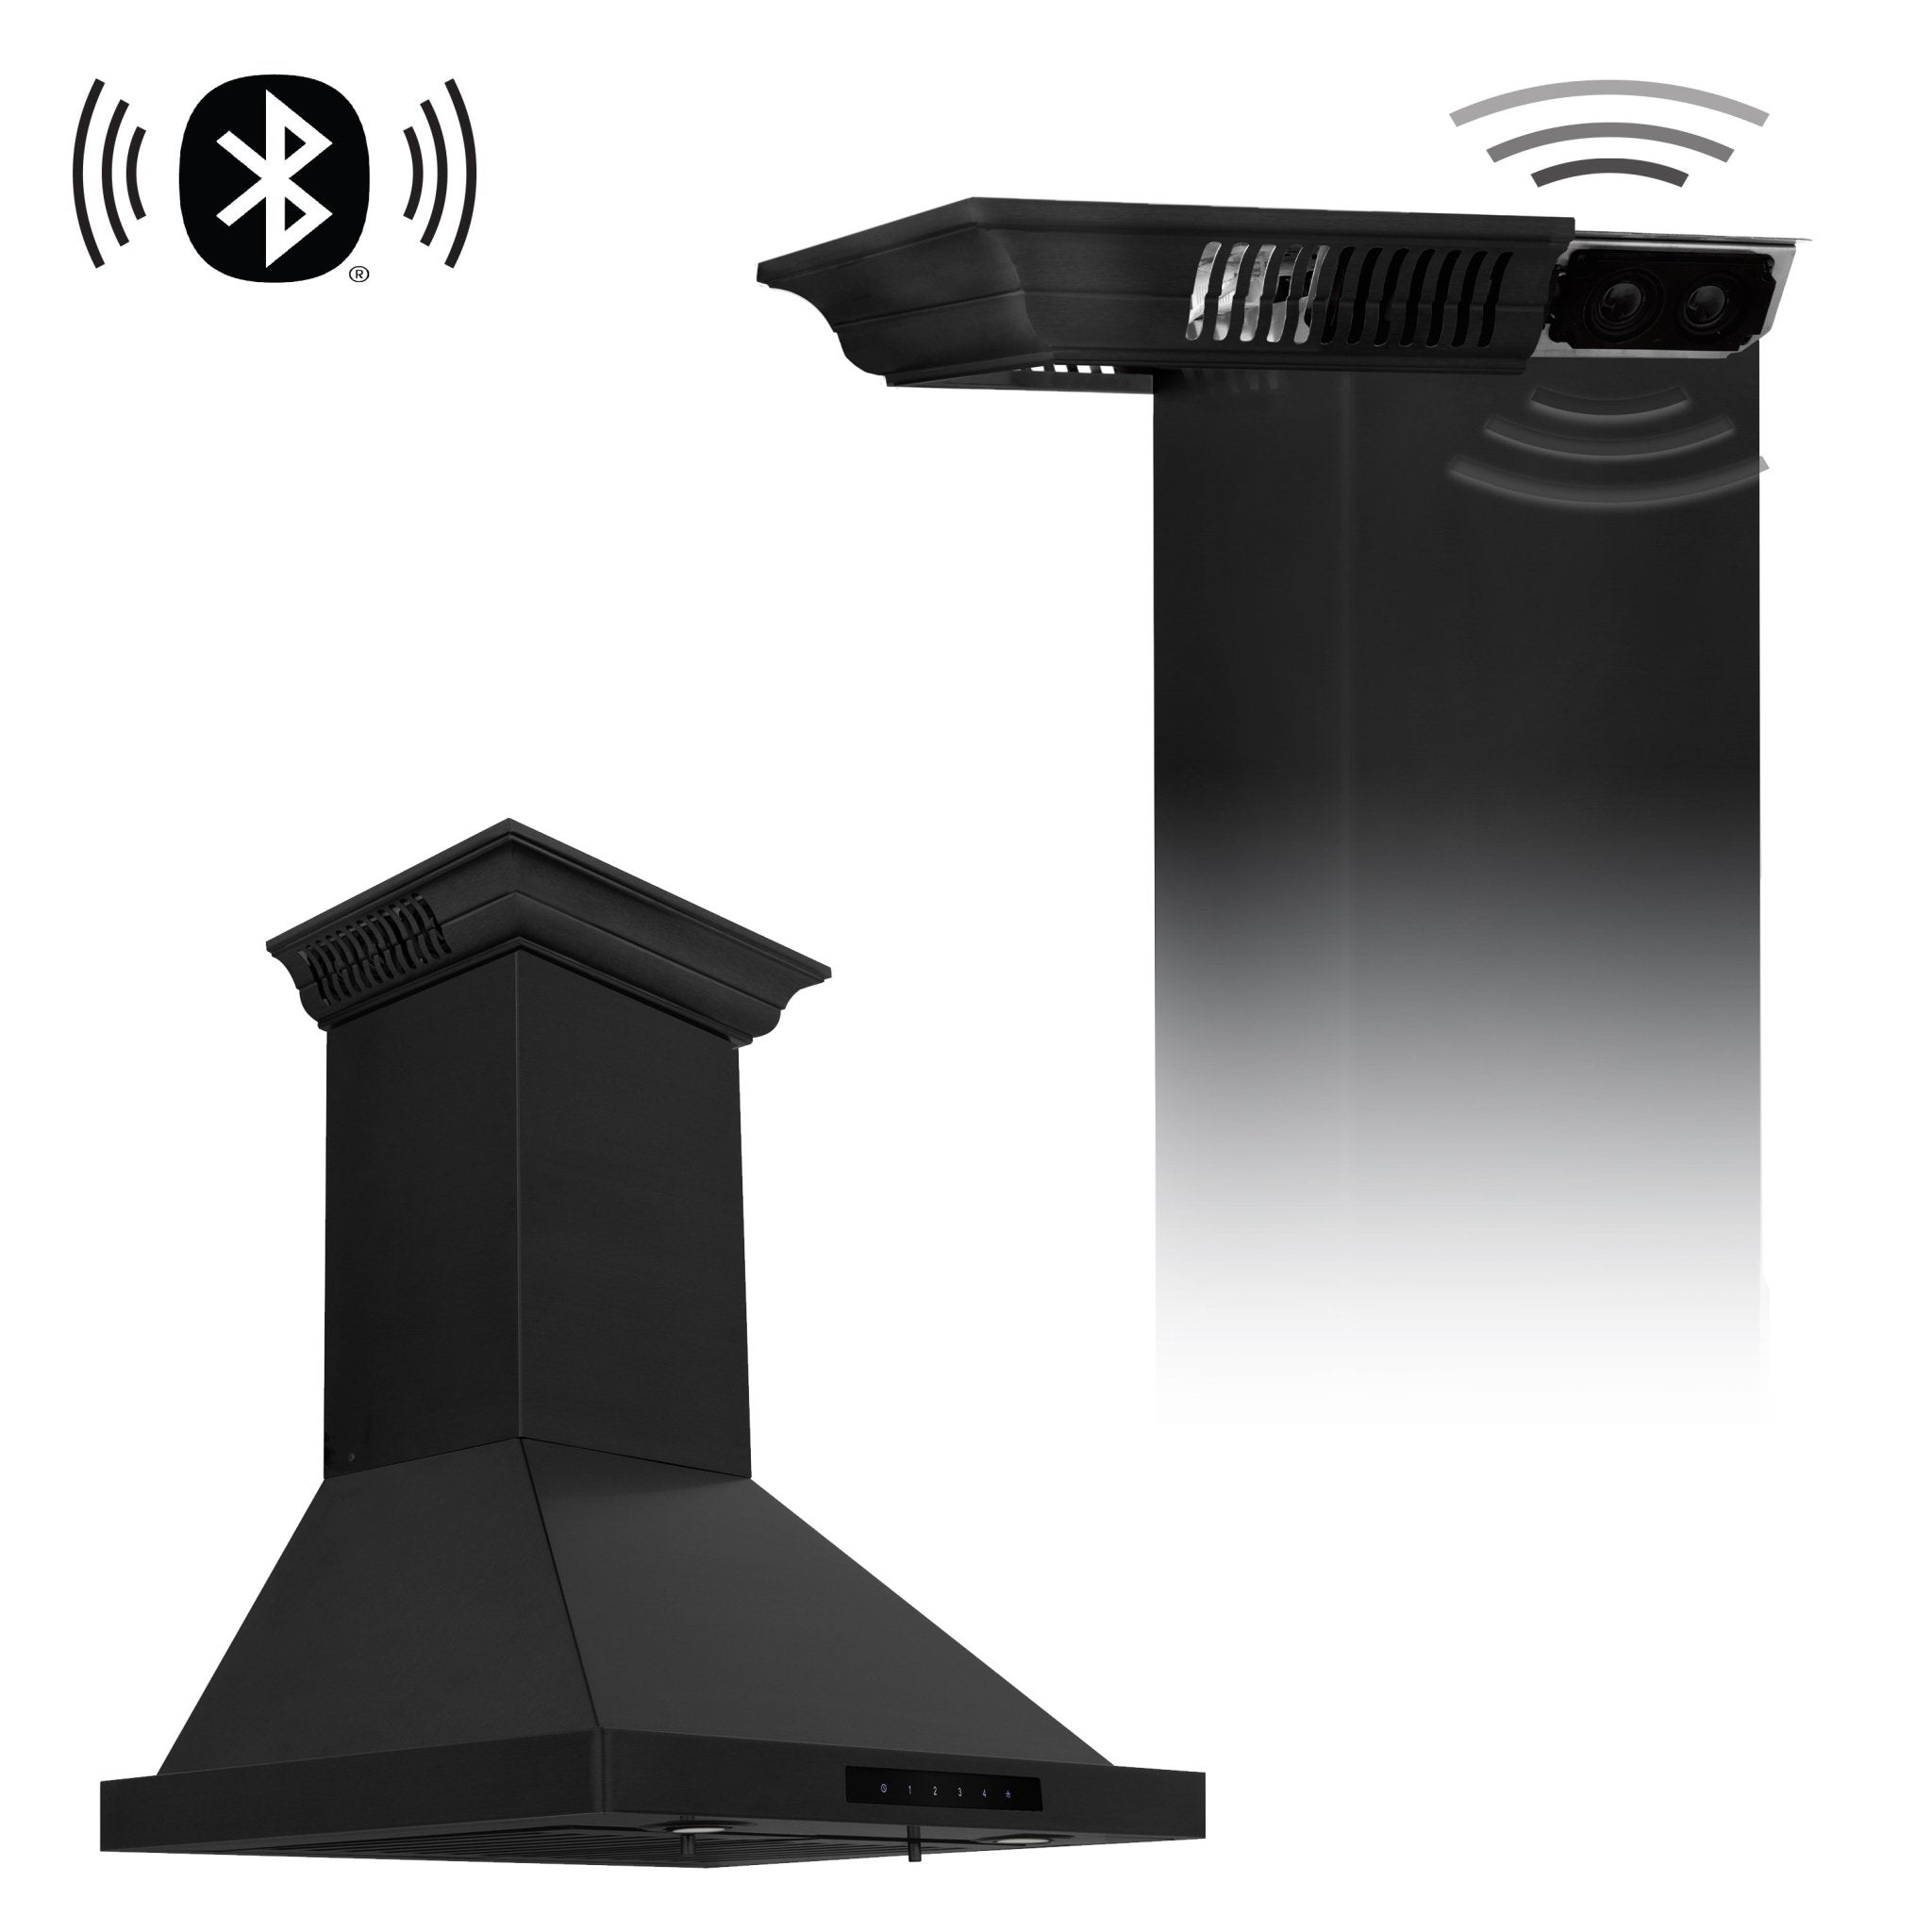 24" ZLINE CrownSound, Ducted Vent Wall Mount Range Hood in Black Stainless Steel with Built-in Bluetooth Speakers (BSKBNCRN-BT-24)